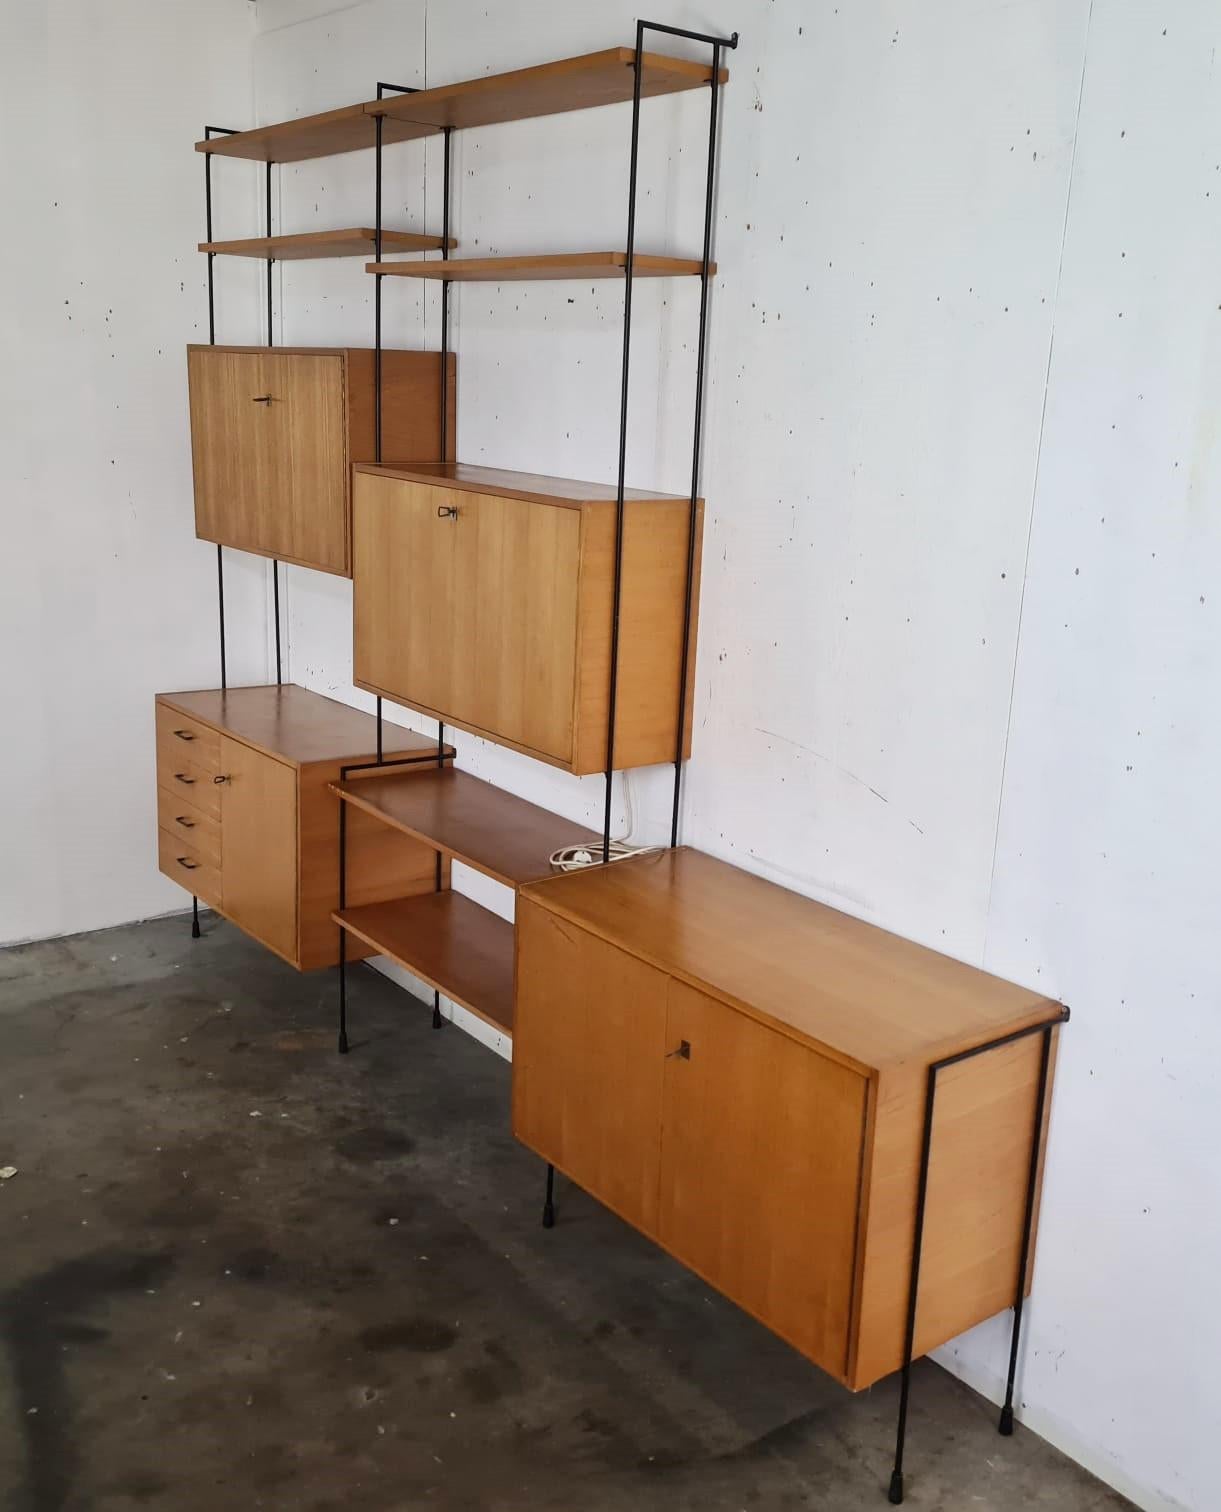 Midcentury wall unit in designed by Ersnt Dieter Hilker model 'Omnia'.

The wall unit is completely modular.

Good condition

1960s, Germany

Measures: Height 217cm/85.43